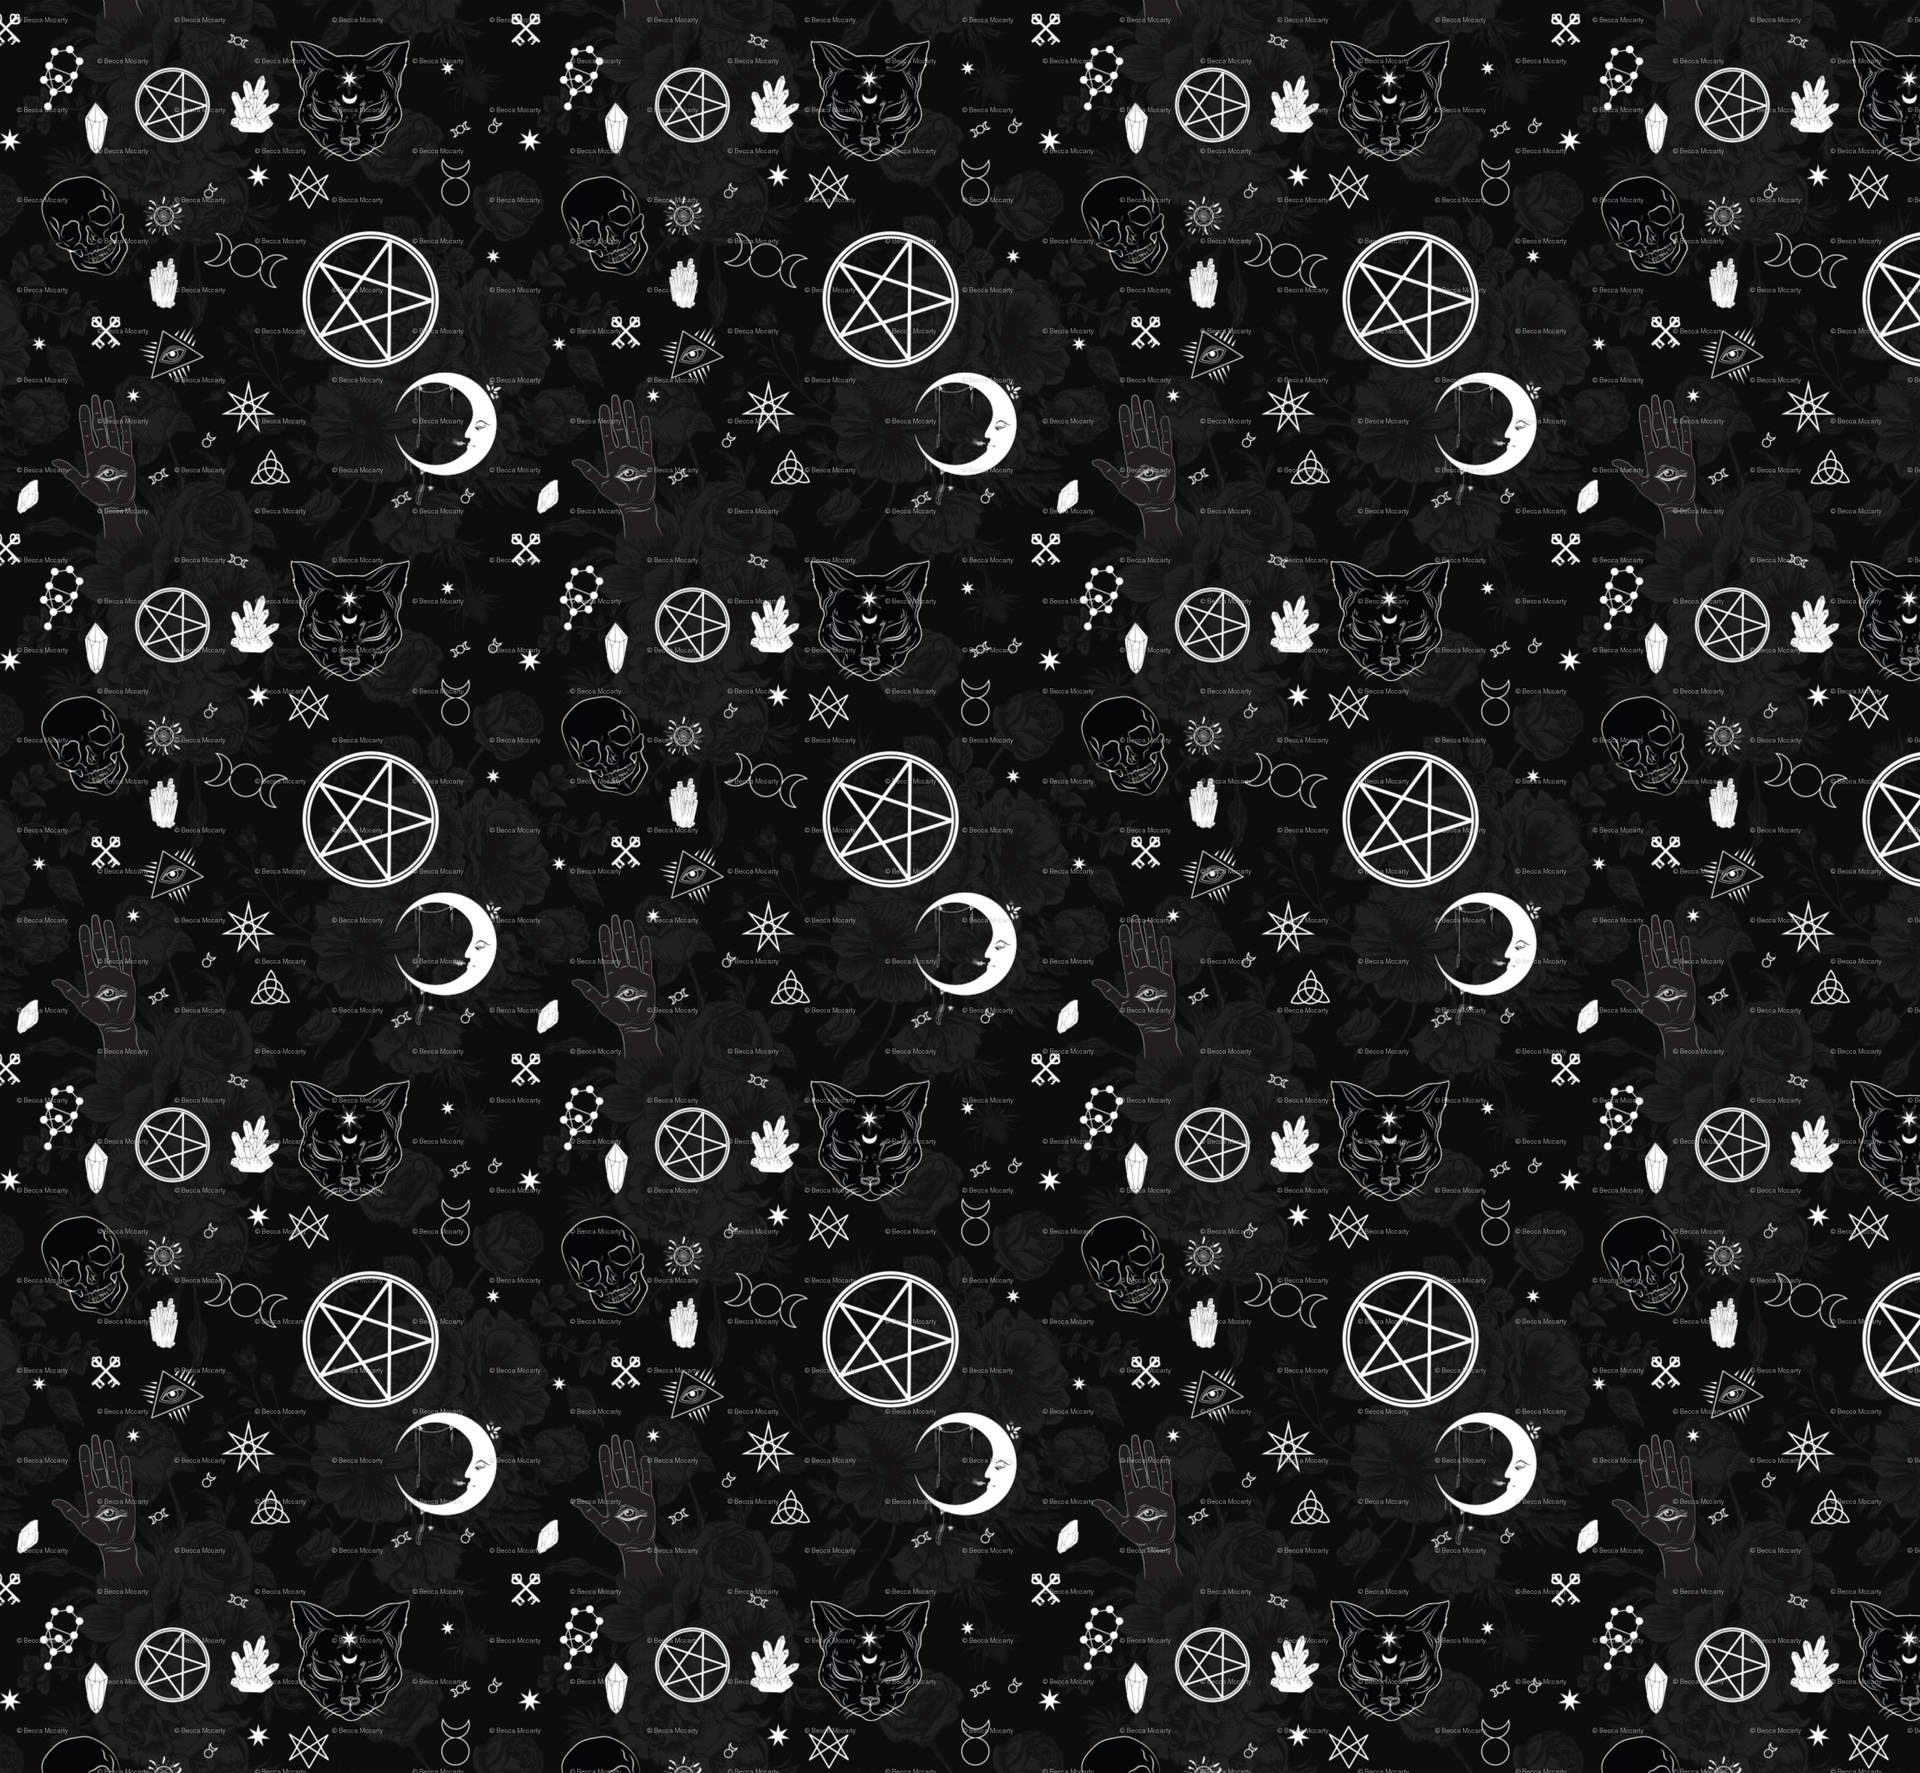 Download Black Witchy Aesthetic Pattern Wallpaper | Wallpapers.com